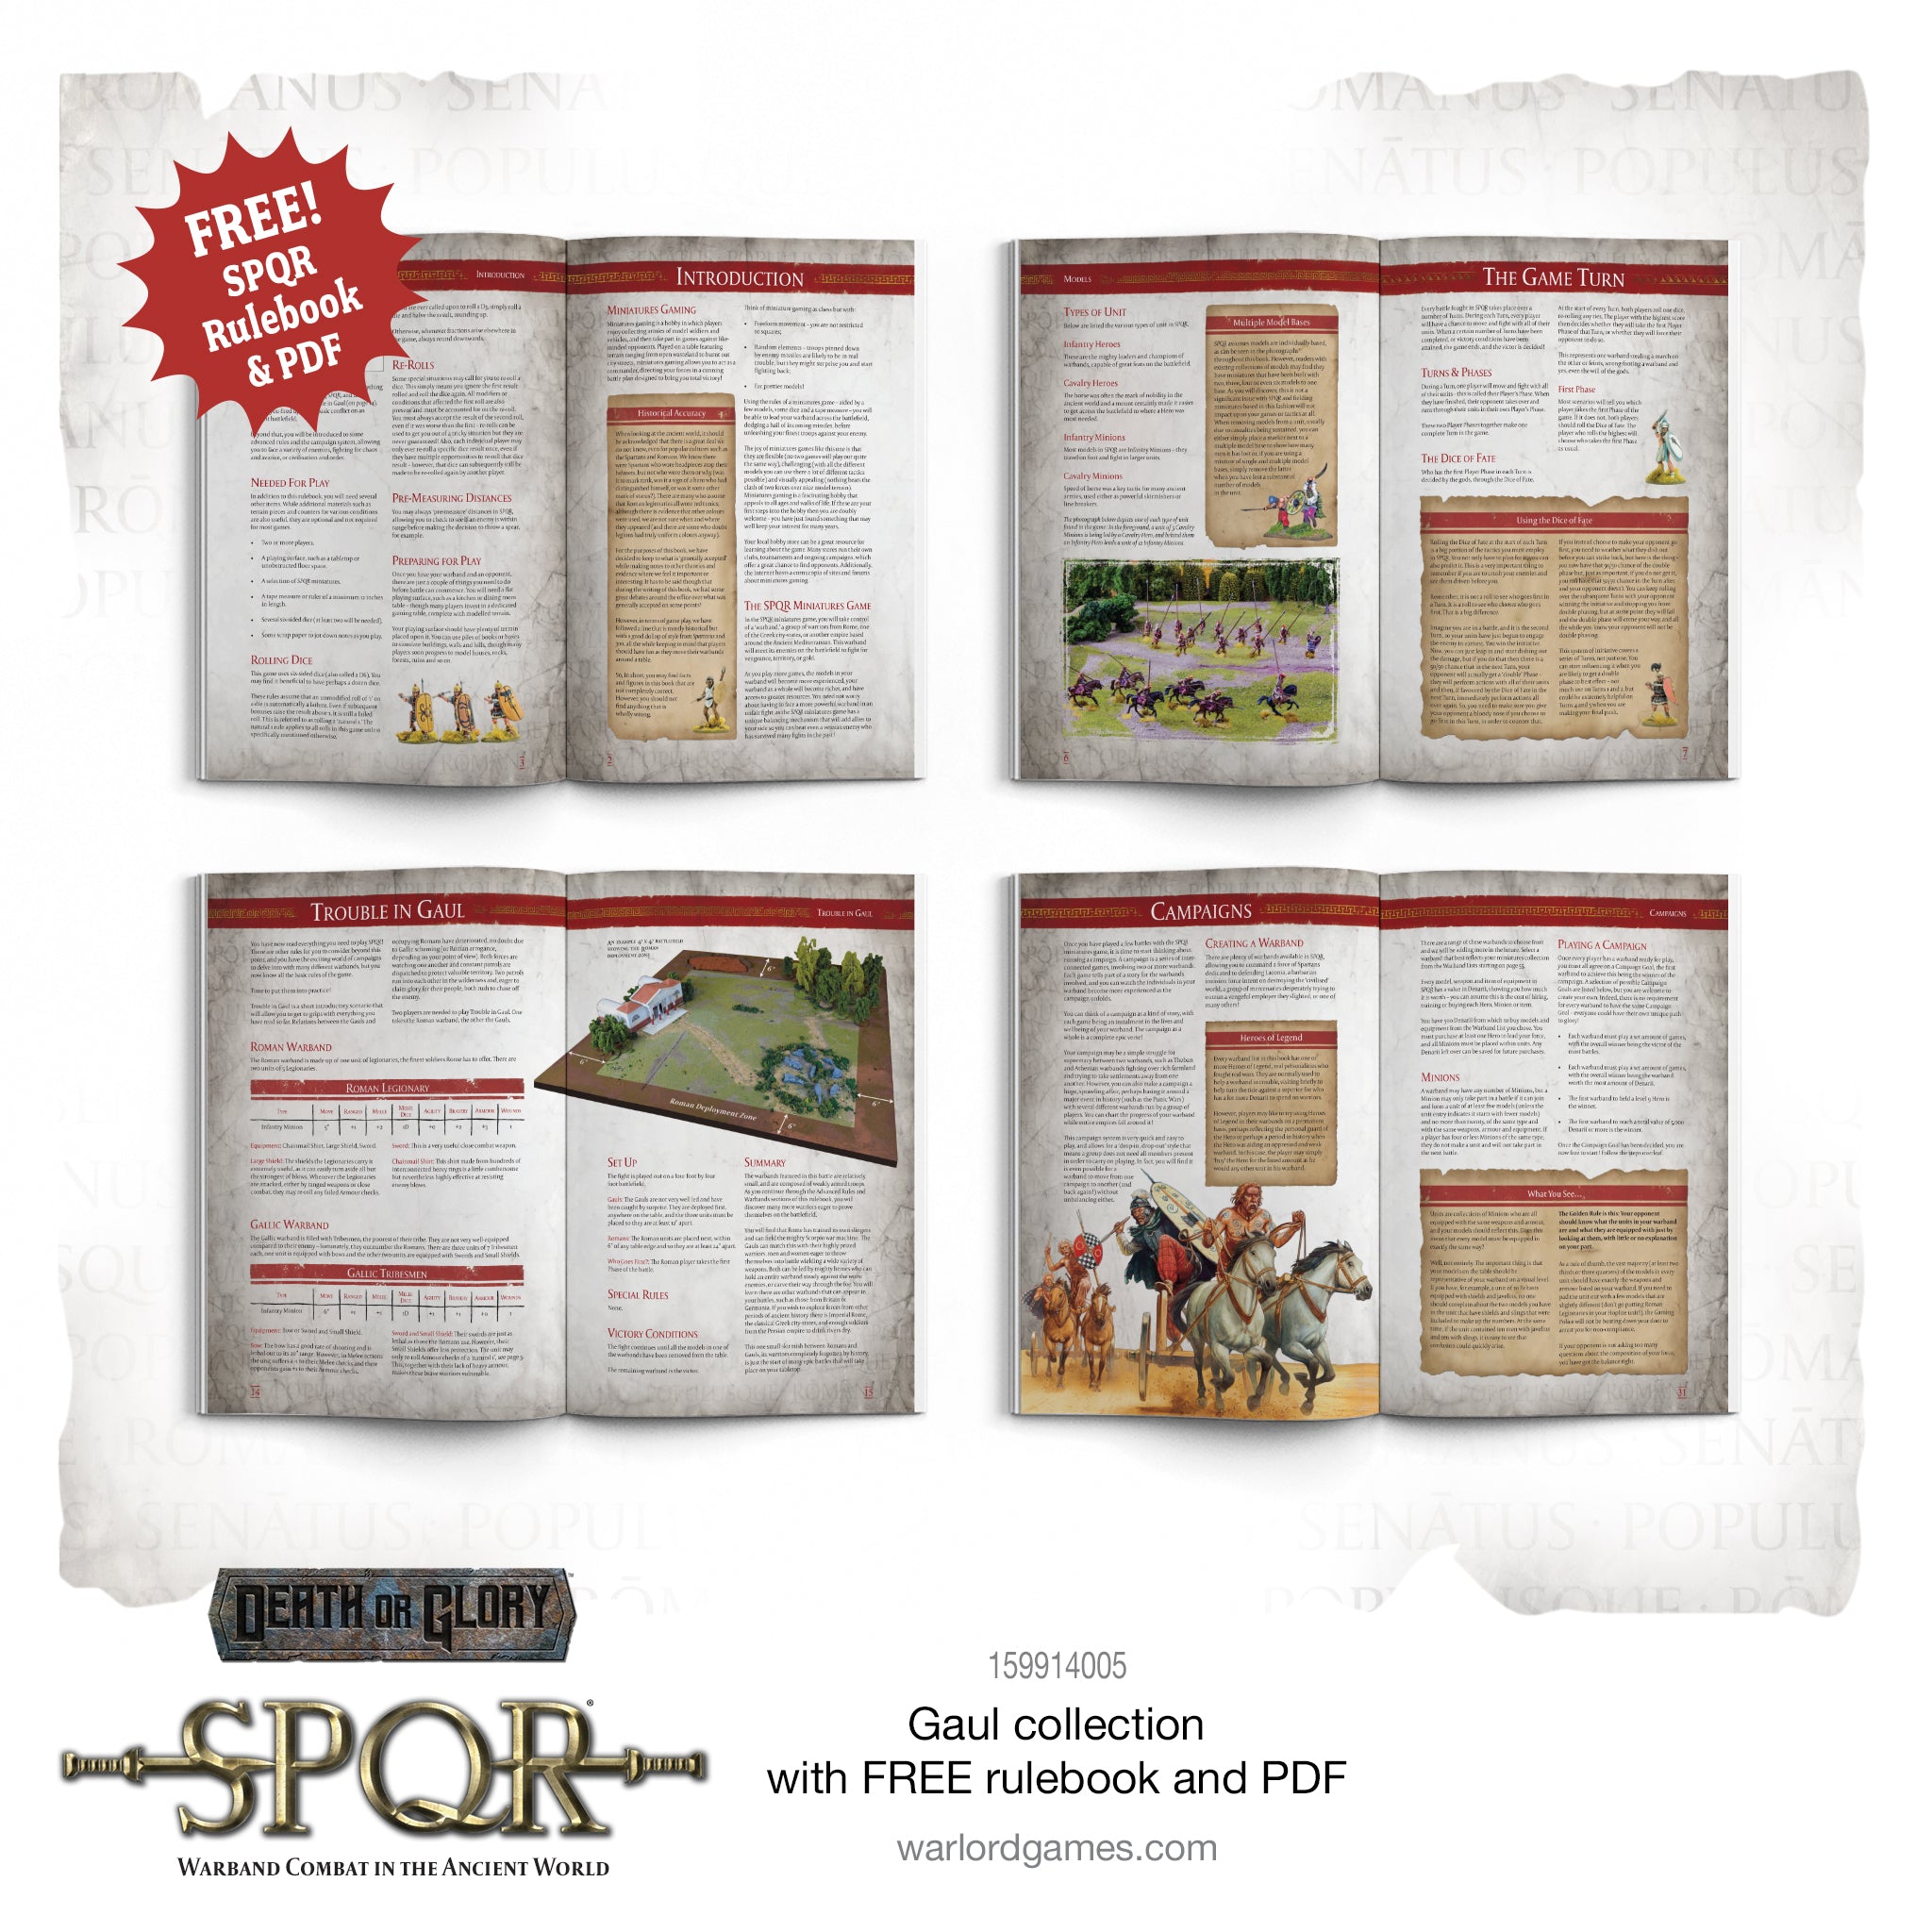 Gaul collection with FREE rulebook and PDF